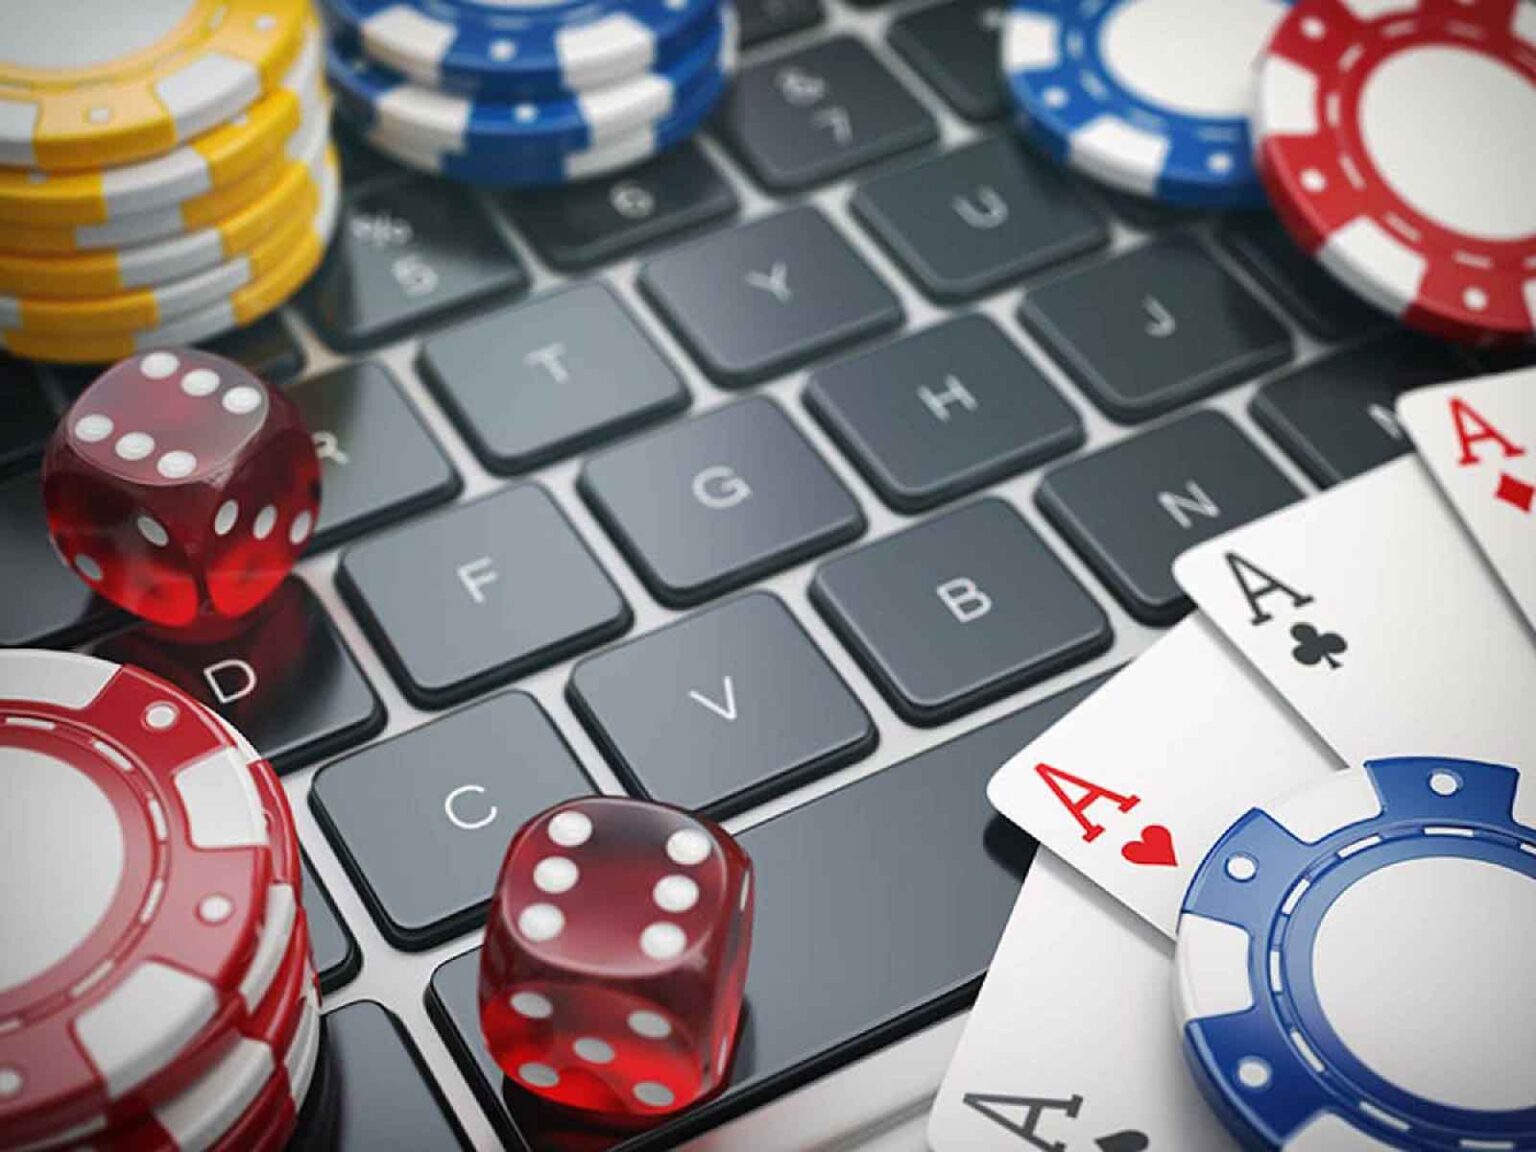 There are tons of exciting online casino offers available. Find out how to take advantage of the best offers here.